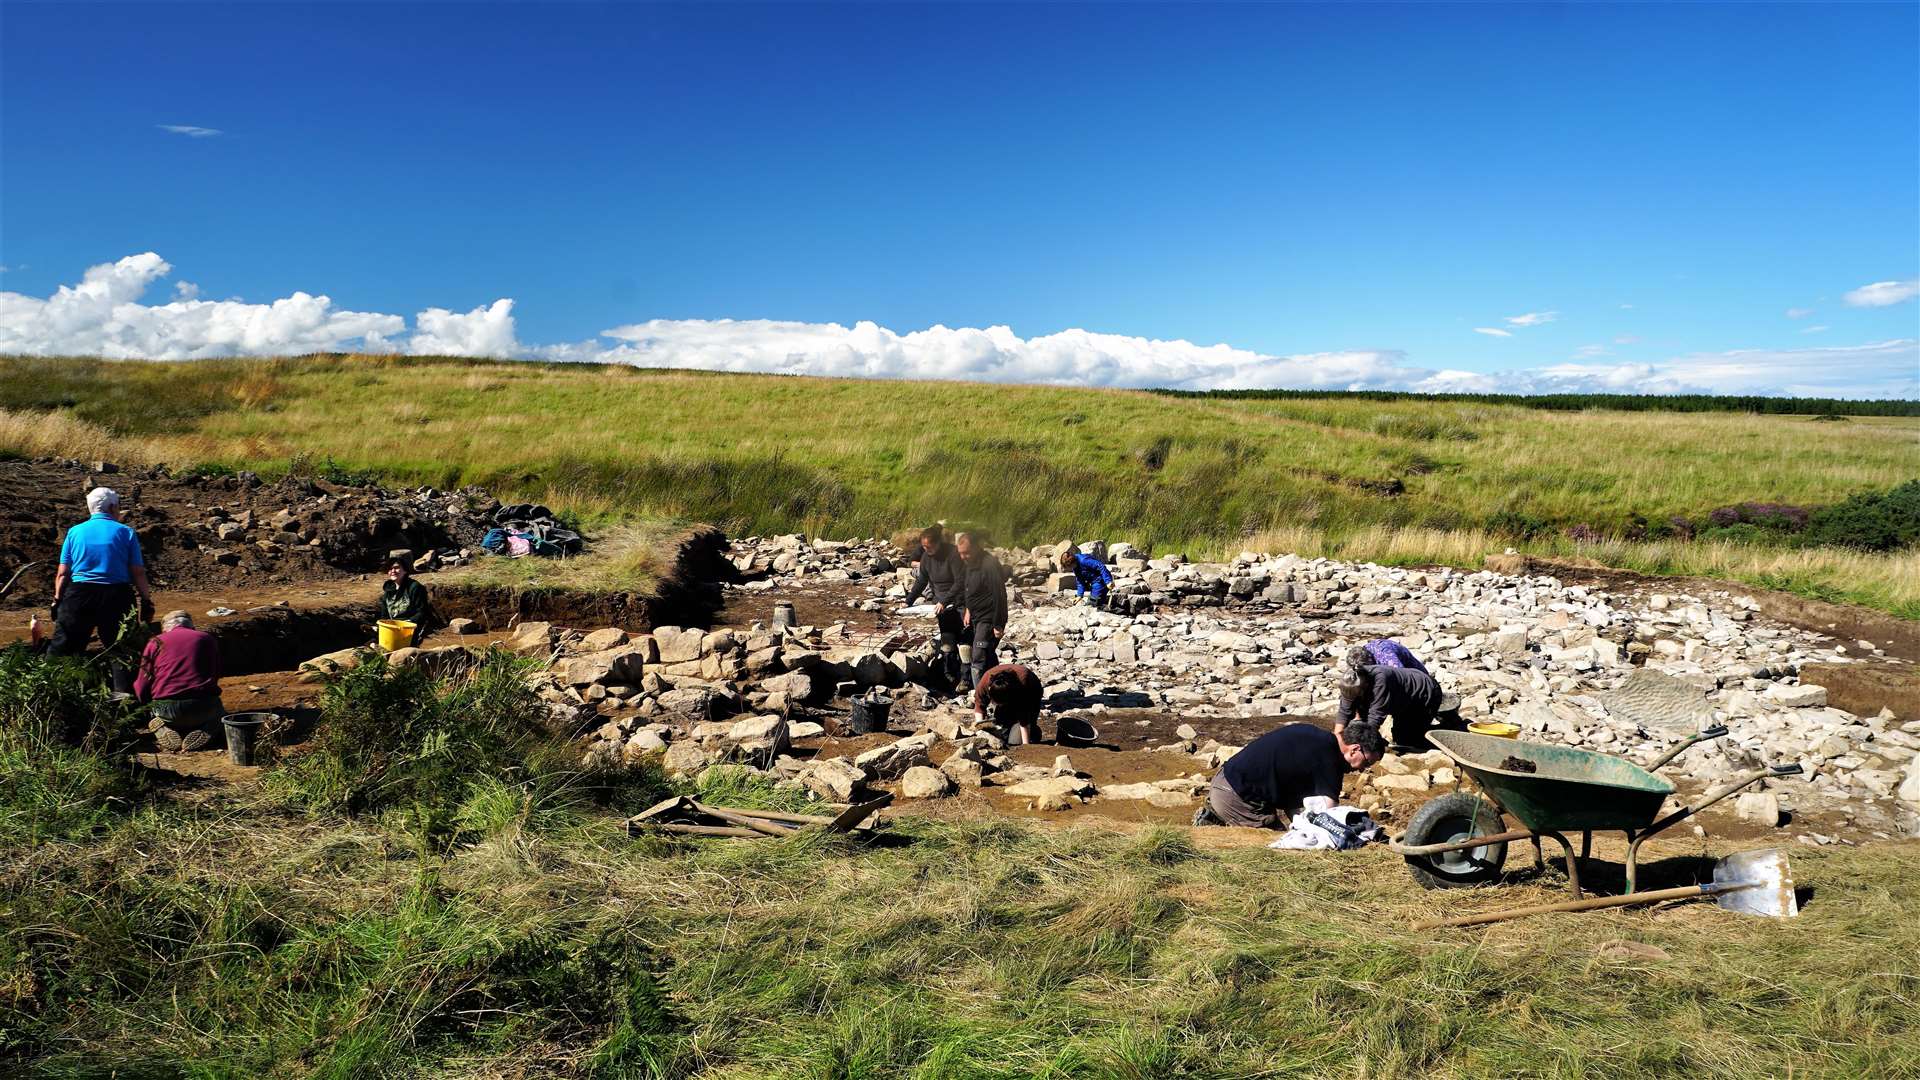 The Swartigill dig gets underway and a team of volunteers are working alongside students and professional archaeologists at the site just off the Tannach road. Picture: DGS